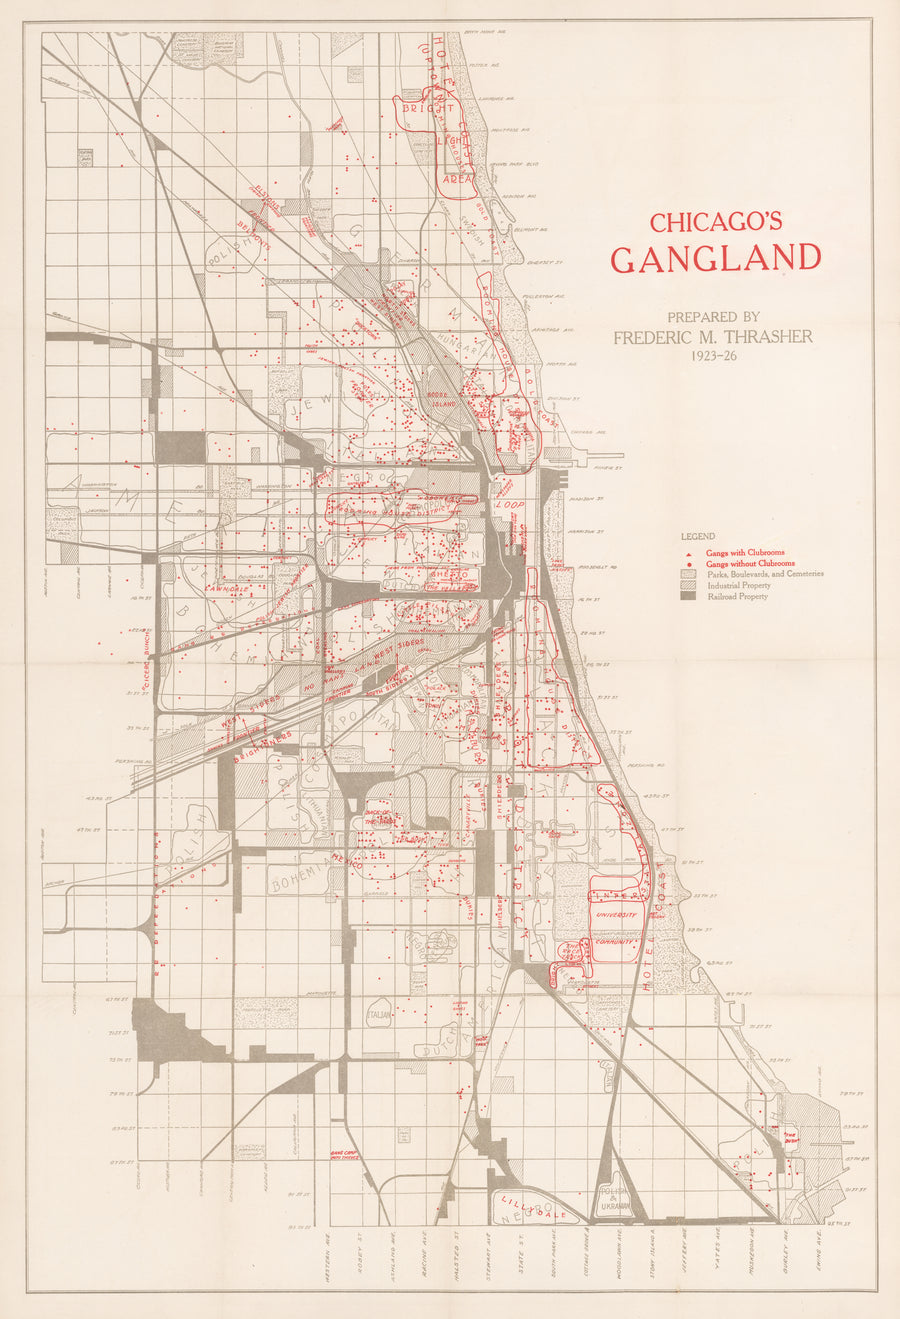 1920s Gang Map | Chicago's Gangland by: Frederic M. Thrasher, 1927